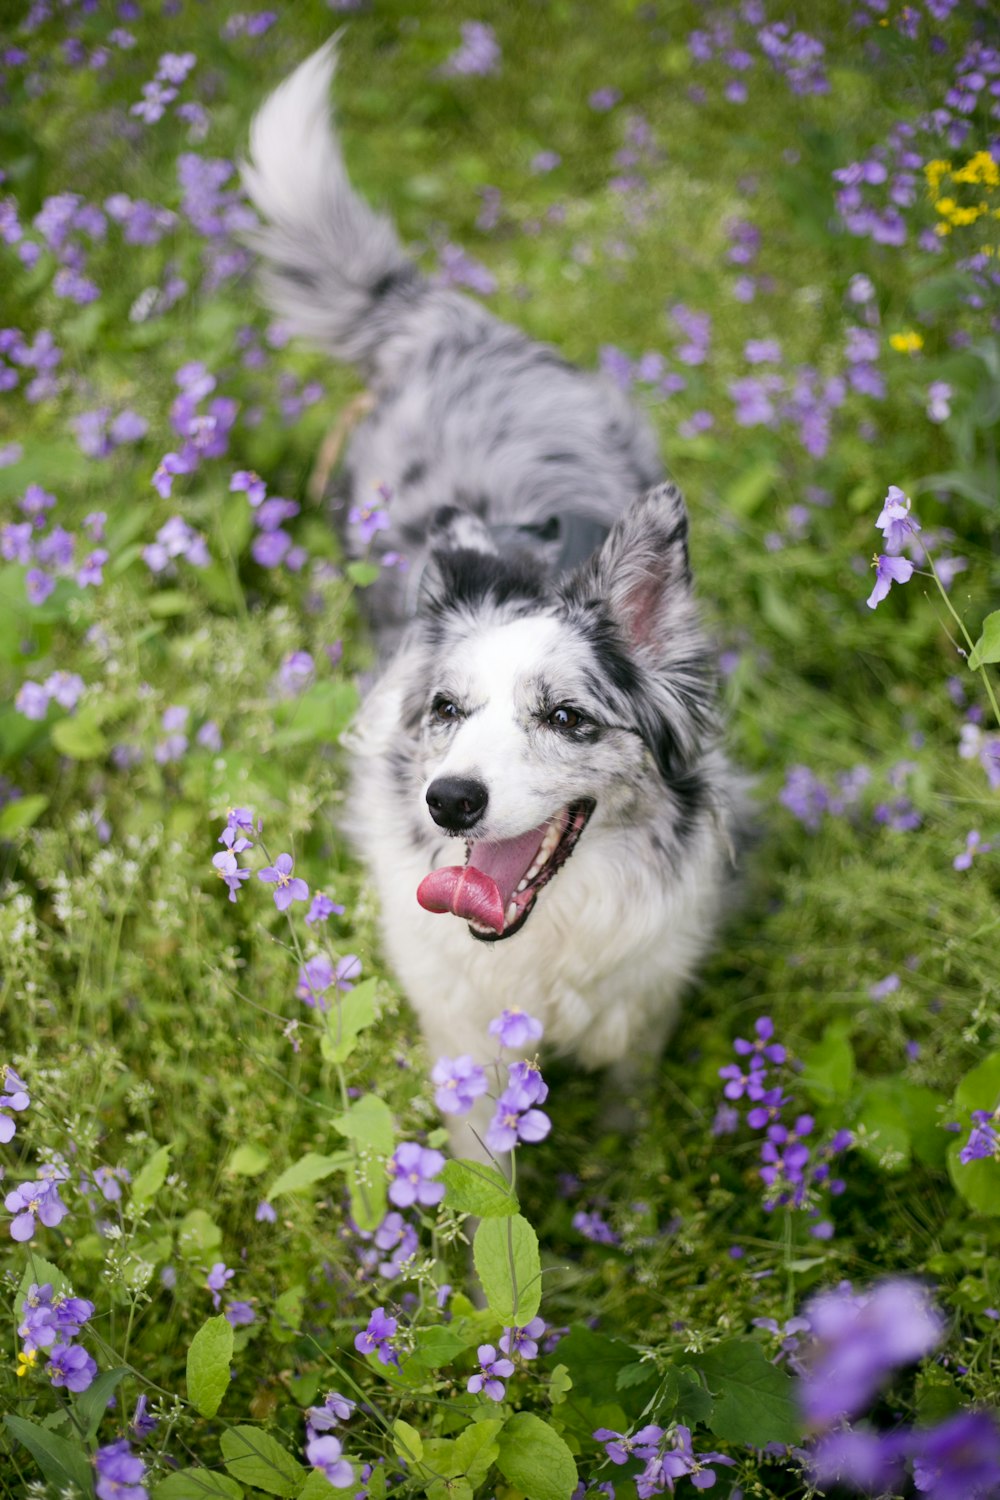 a gray and white dog standing in a field of purple flowers